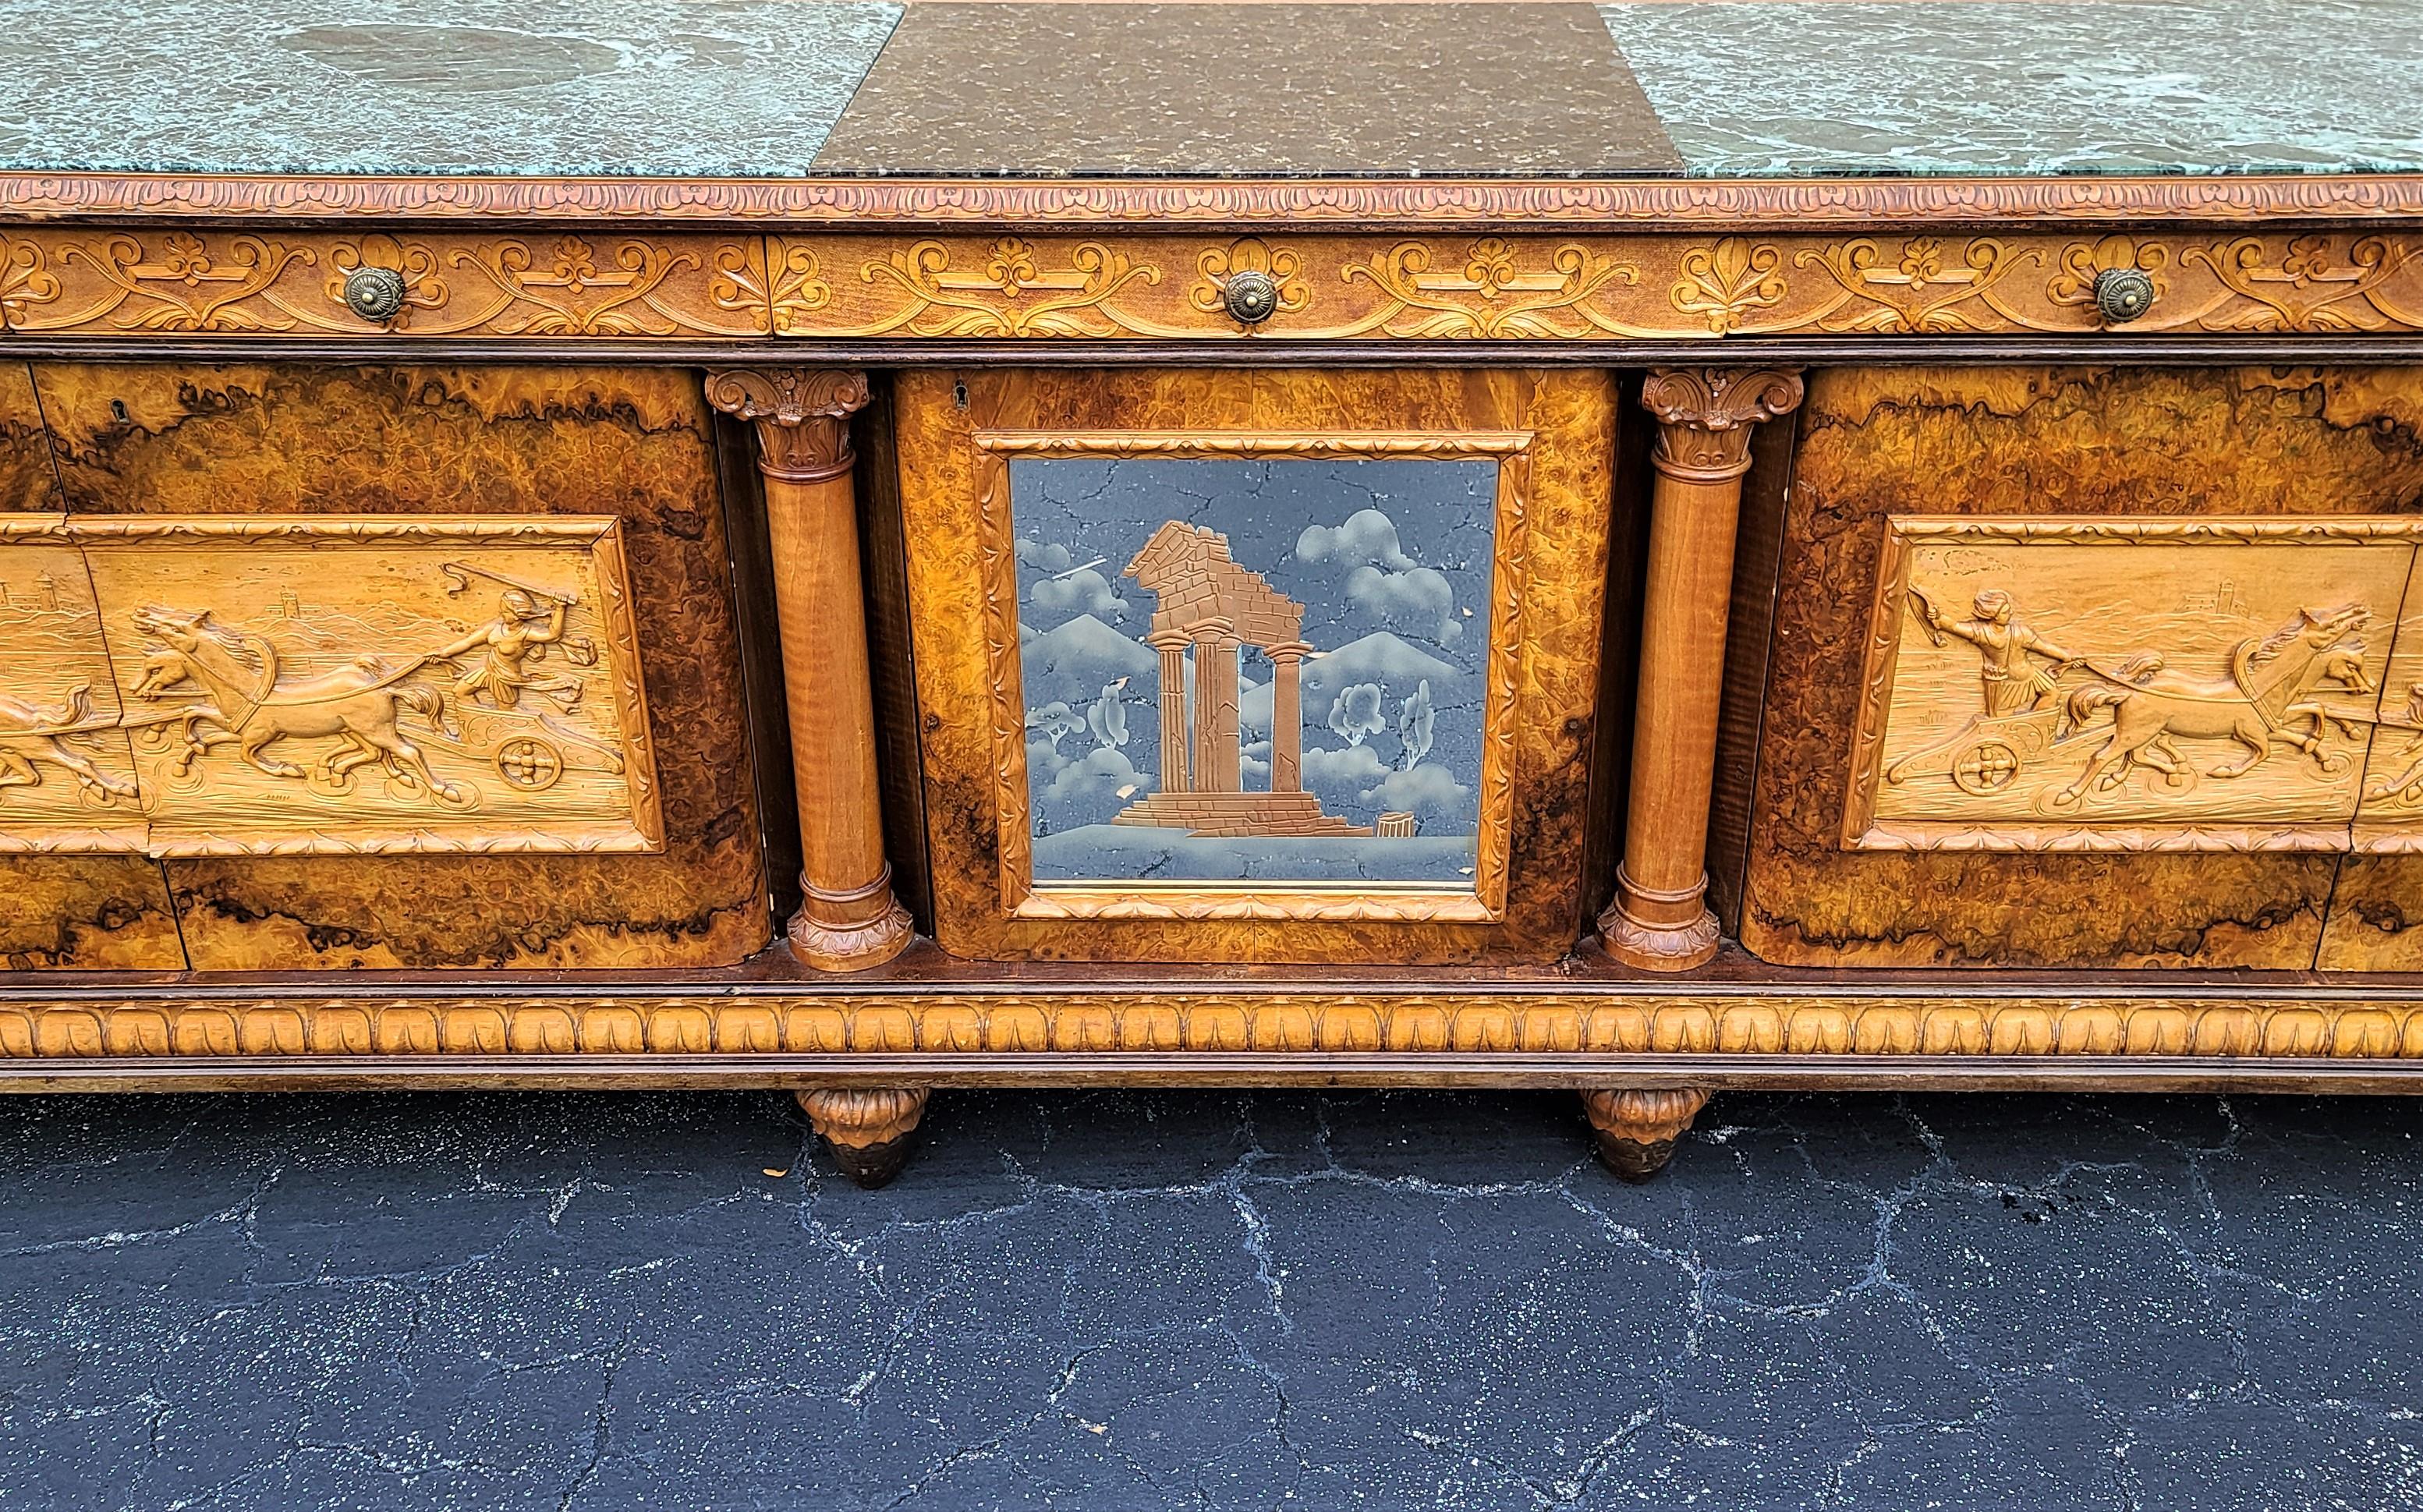 offering one of our recent Palm Beach estate fine furniture acquisitions of an
antique c 1900 hand carved Neoclassical Italian credenza bar cabinet

Featuring all hand-carved drawer and door fronts surrounded by burl wood veneer, marble and stone